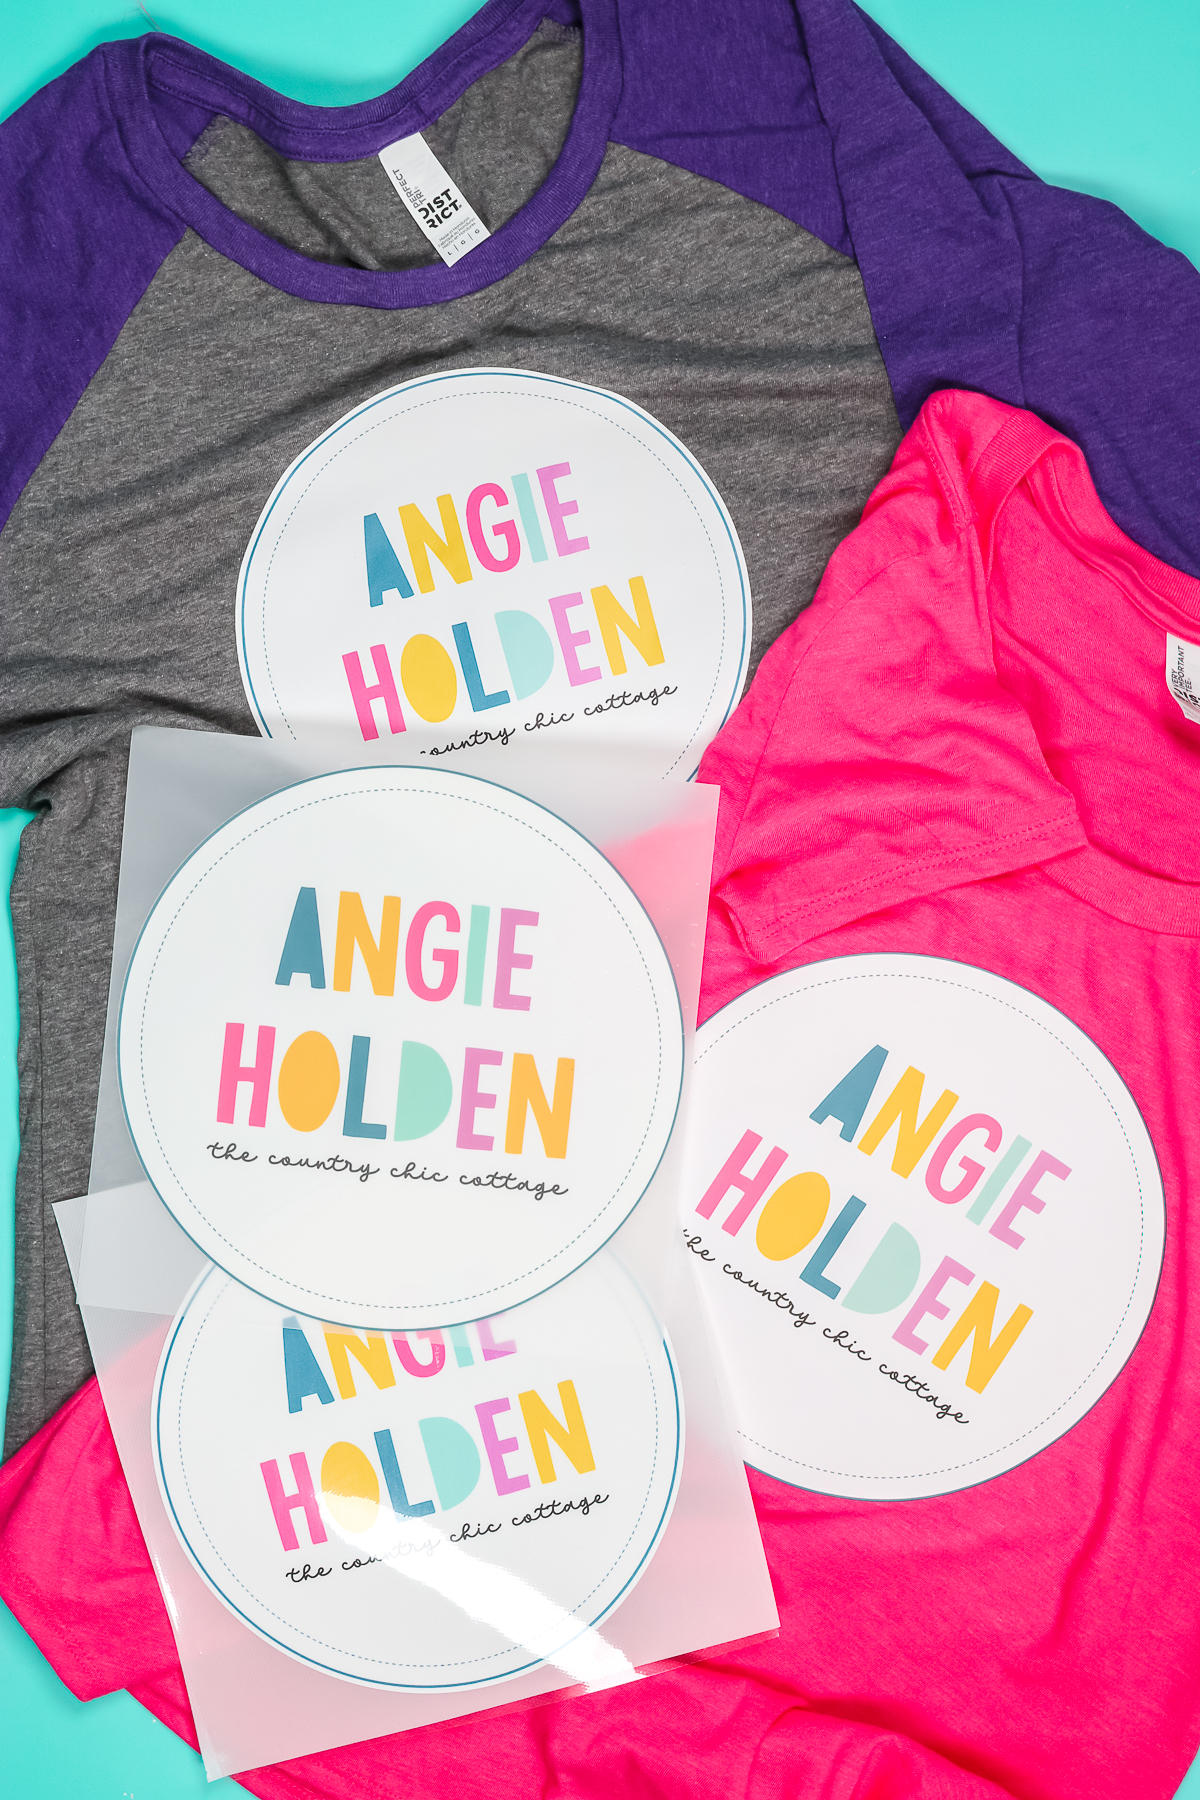 Screenprint Transfers applied with Angie Holden logo and cut out not applied.